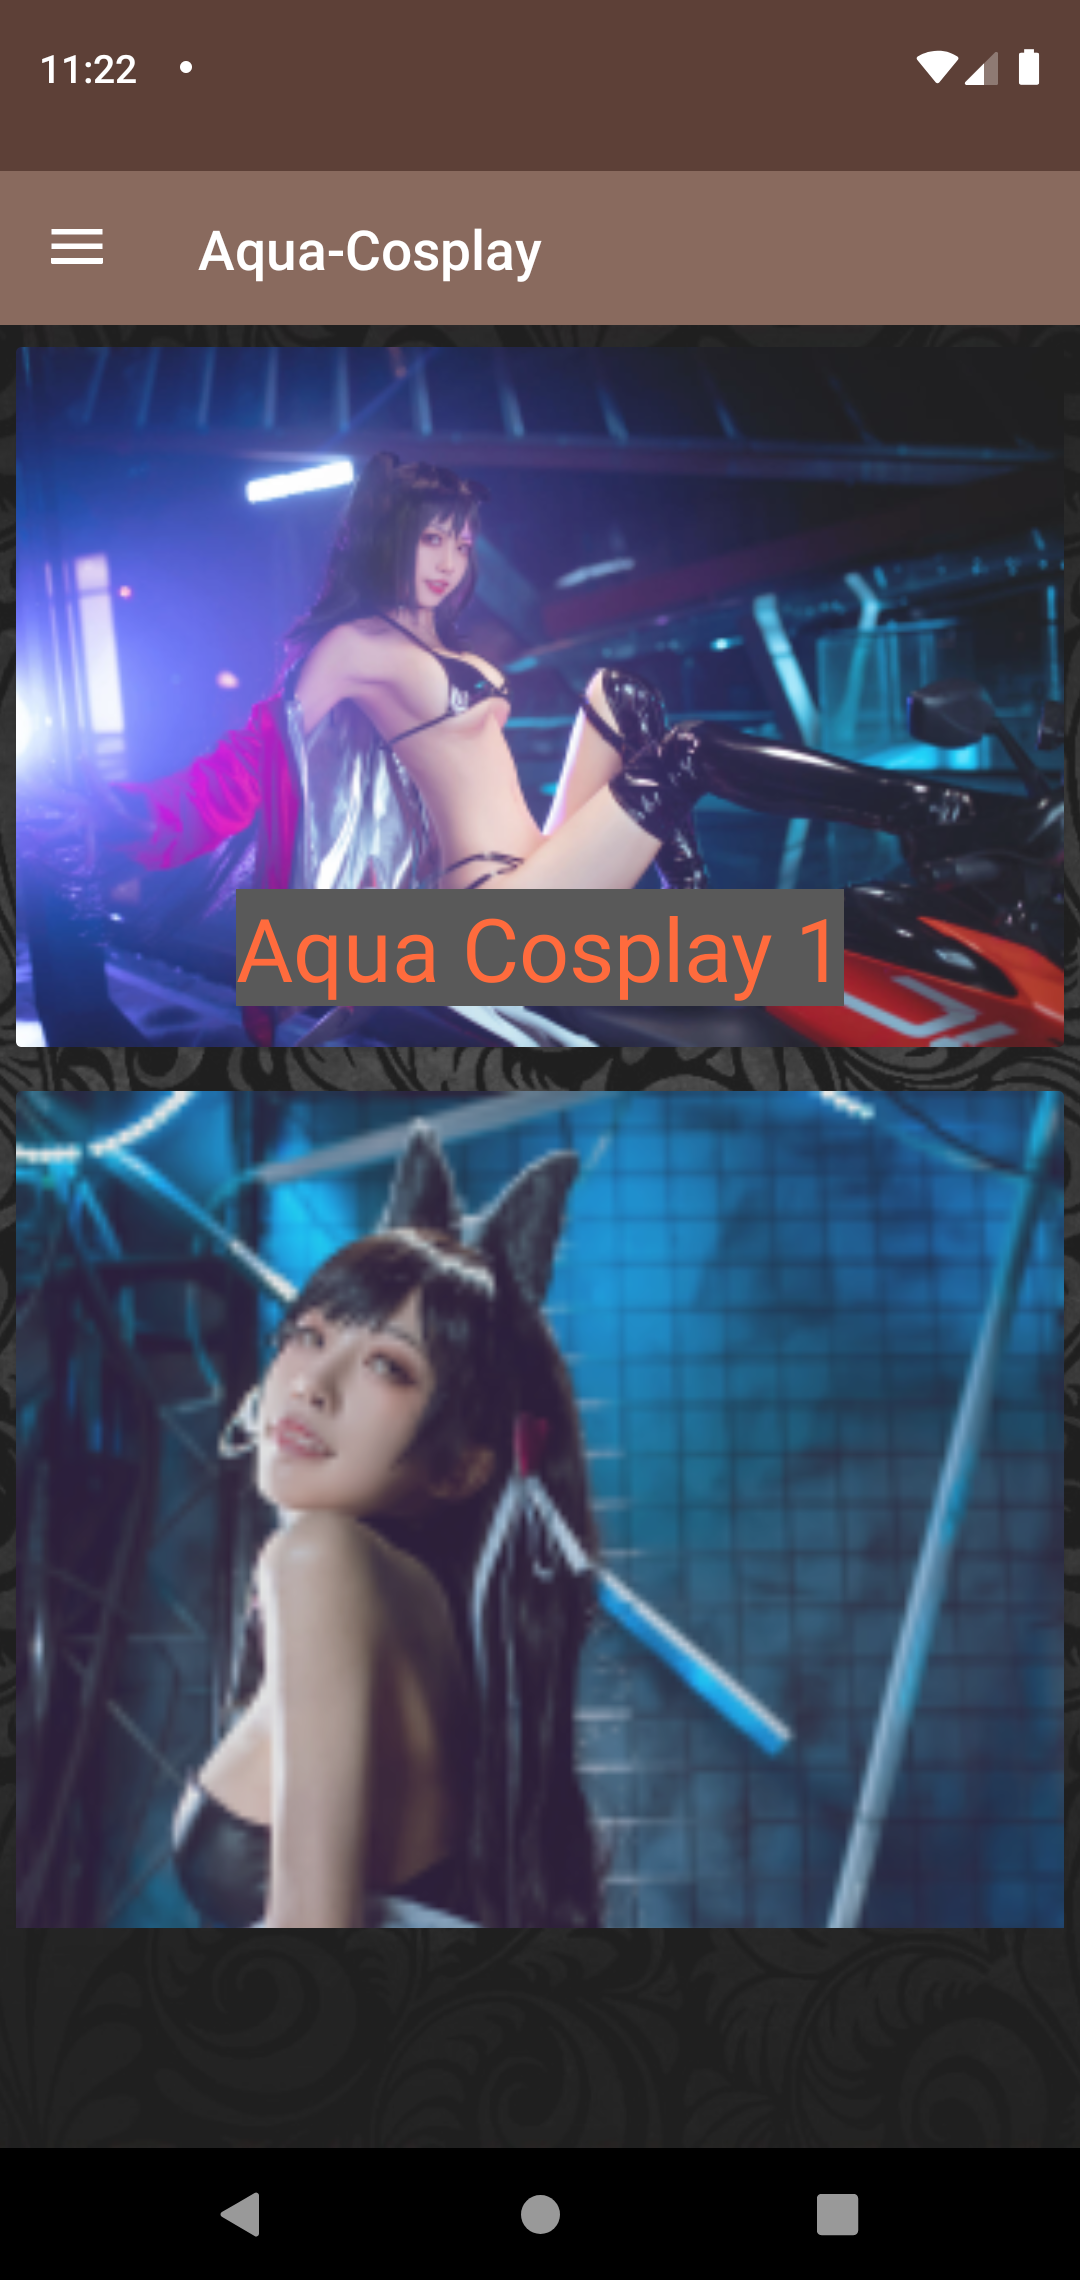 Aqua Cosplay sexy,for,baixar,android,gallery,best,hentai,adult,galleries,gay,pics,pictures,images,app,apps,manga,how,porn,cosplay,cfnm,collection,download,photos